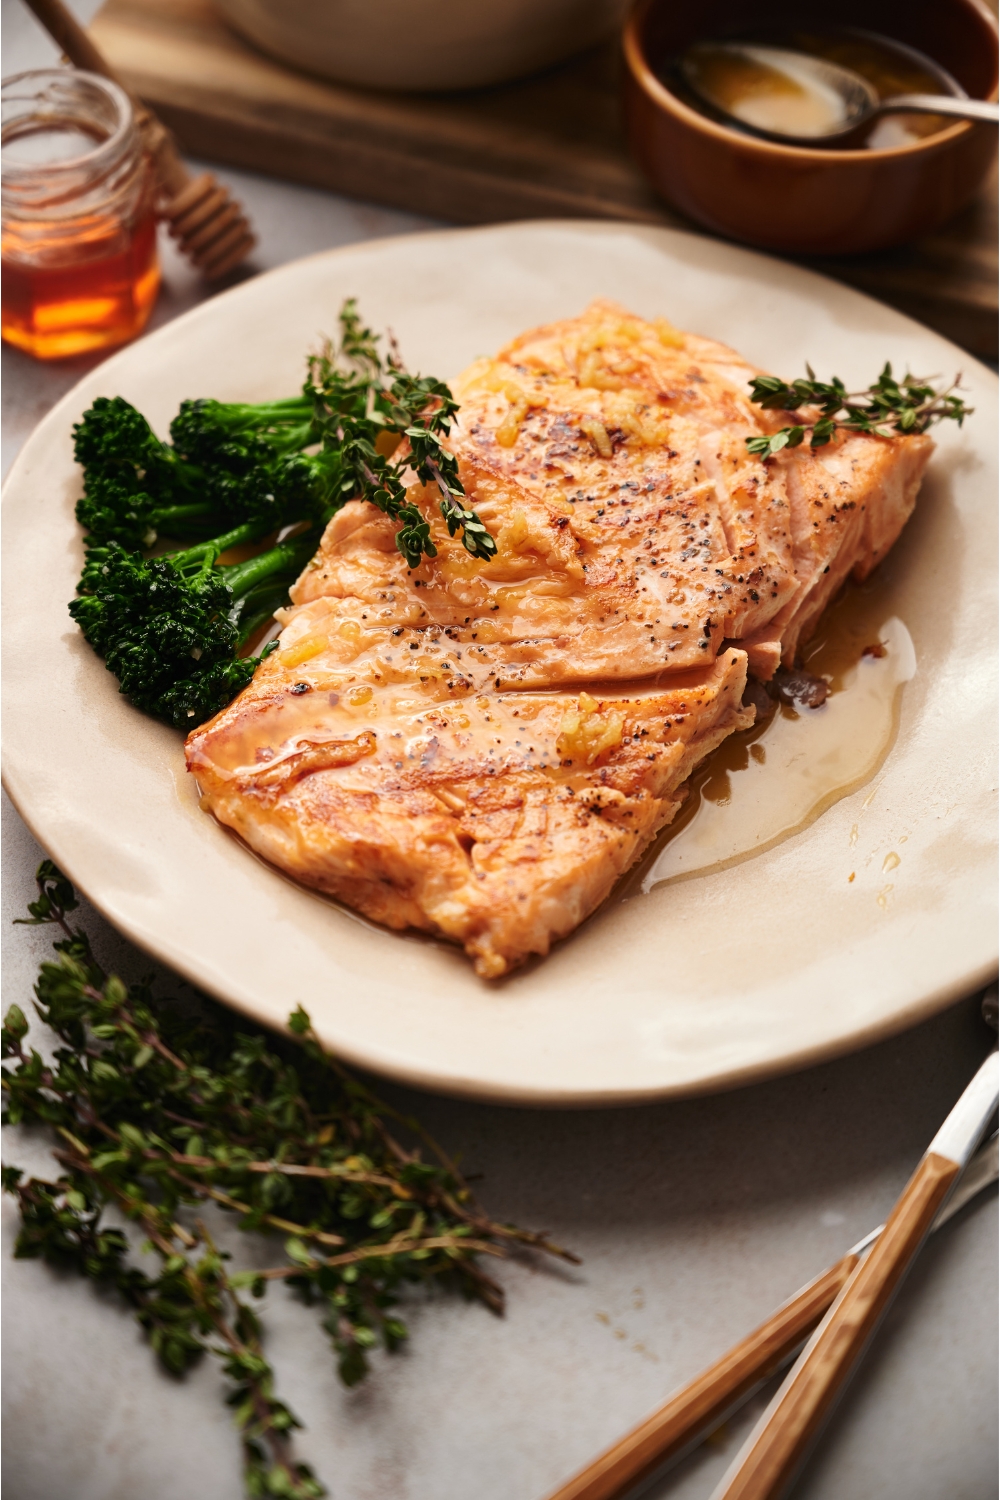 Sous vide salmon on an orange plate with a side of broccolini and a sauce poured overtop the salmon.